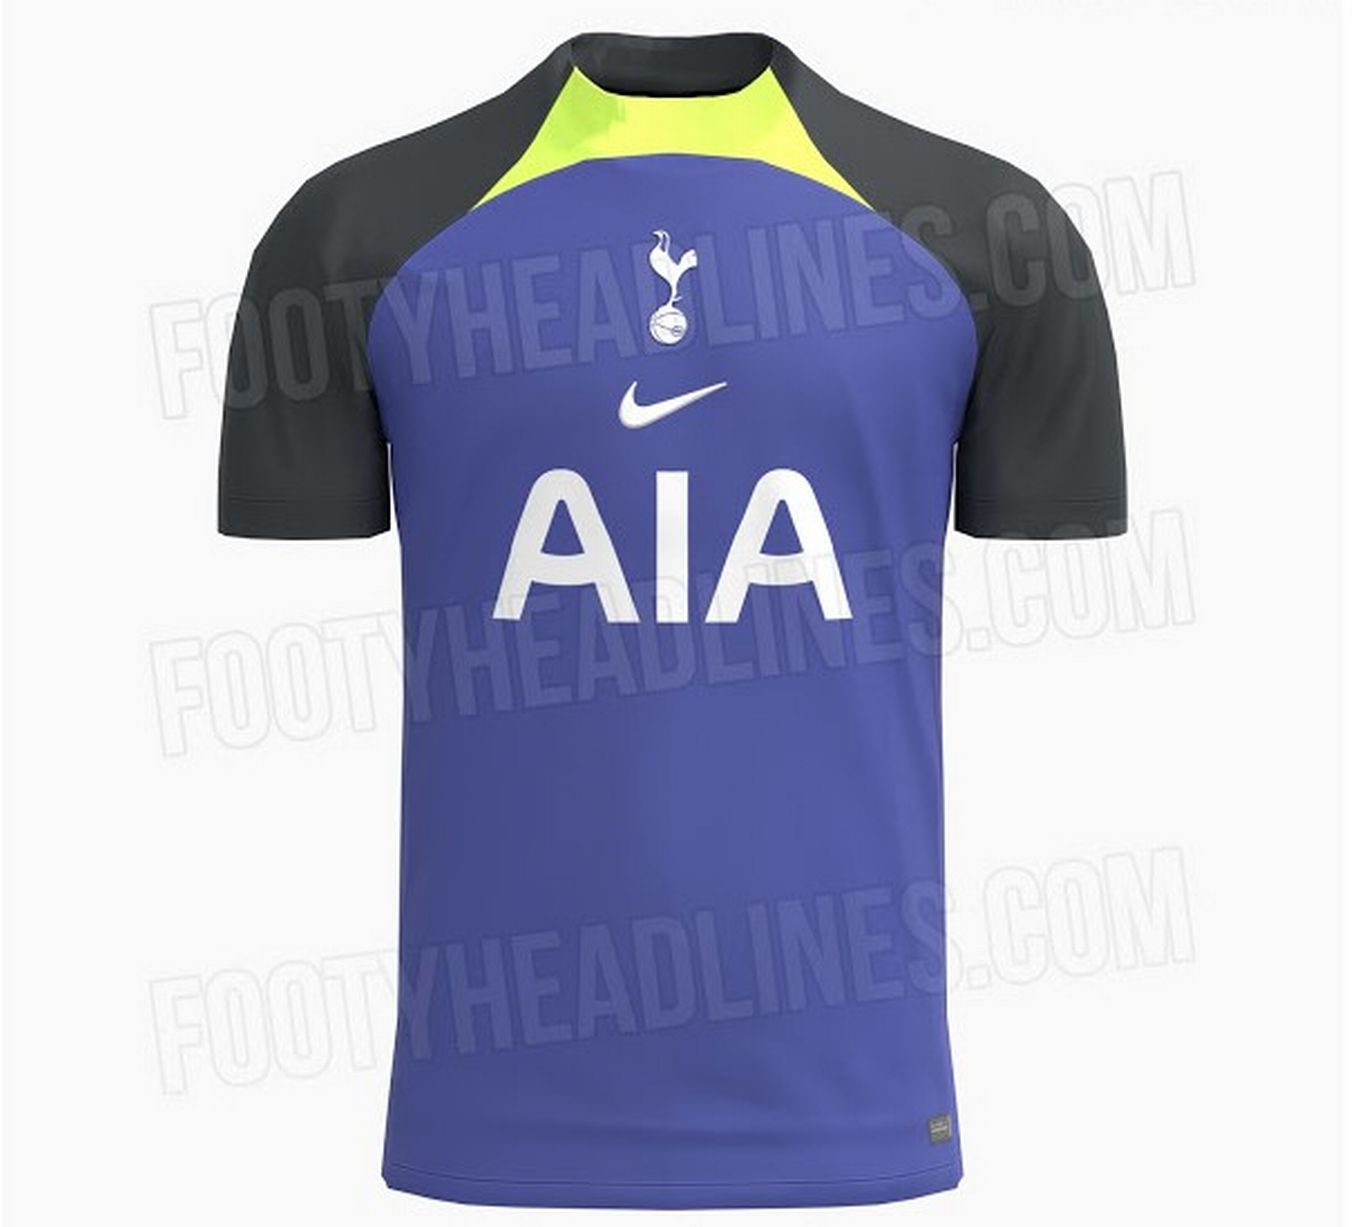 Tottenham Hotspur fans have been given a sneak peek at the new home kit that the players will unveil next week against Aston Villa.